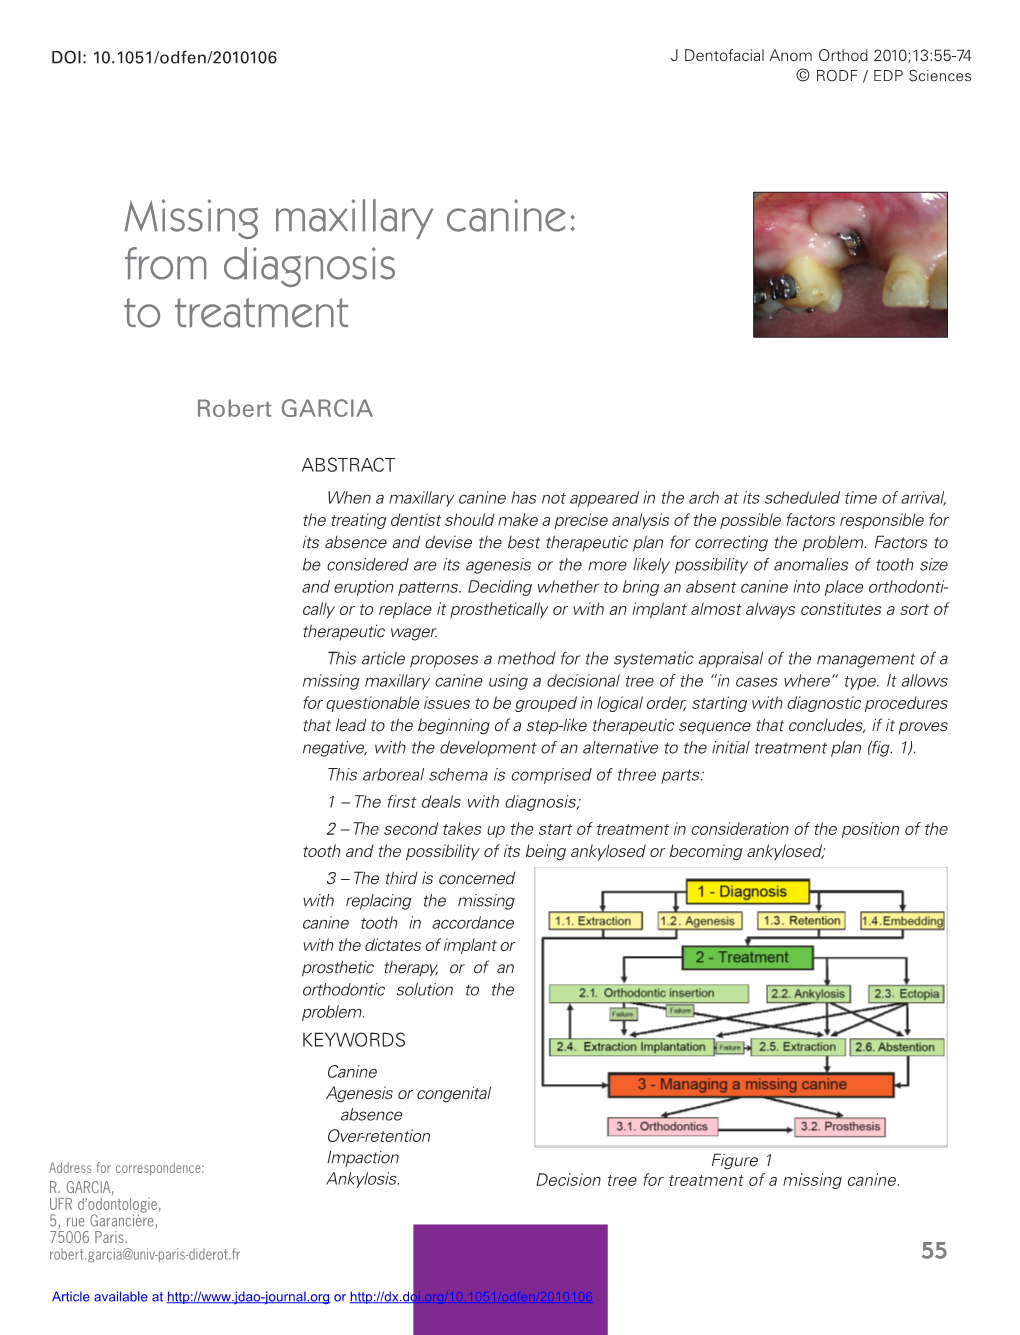 Missing Maxillary Canine: from Diagnosis to Treatment